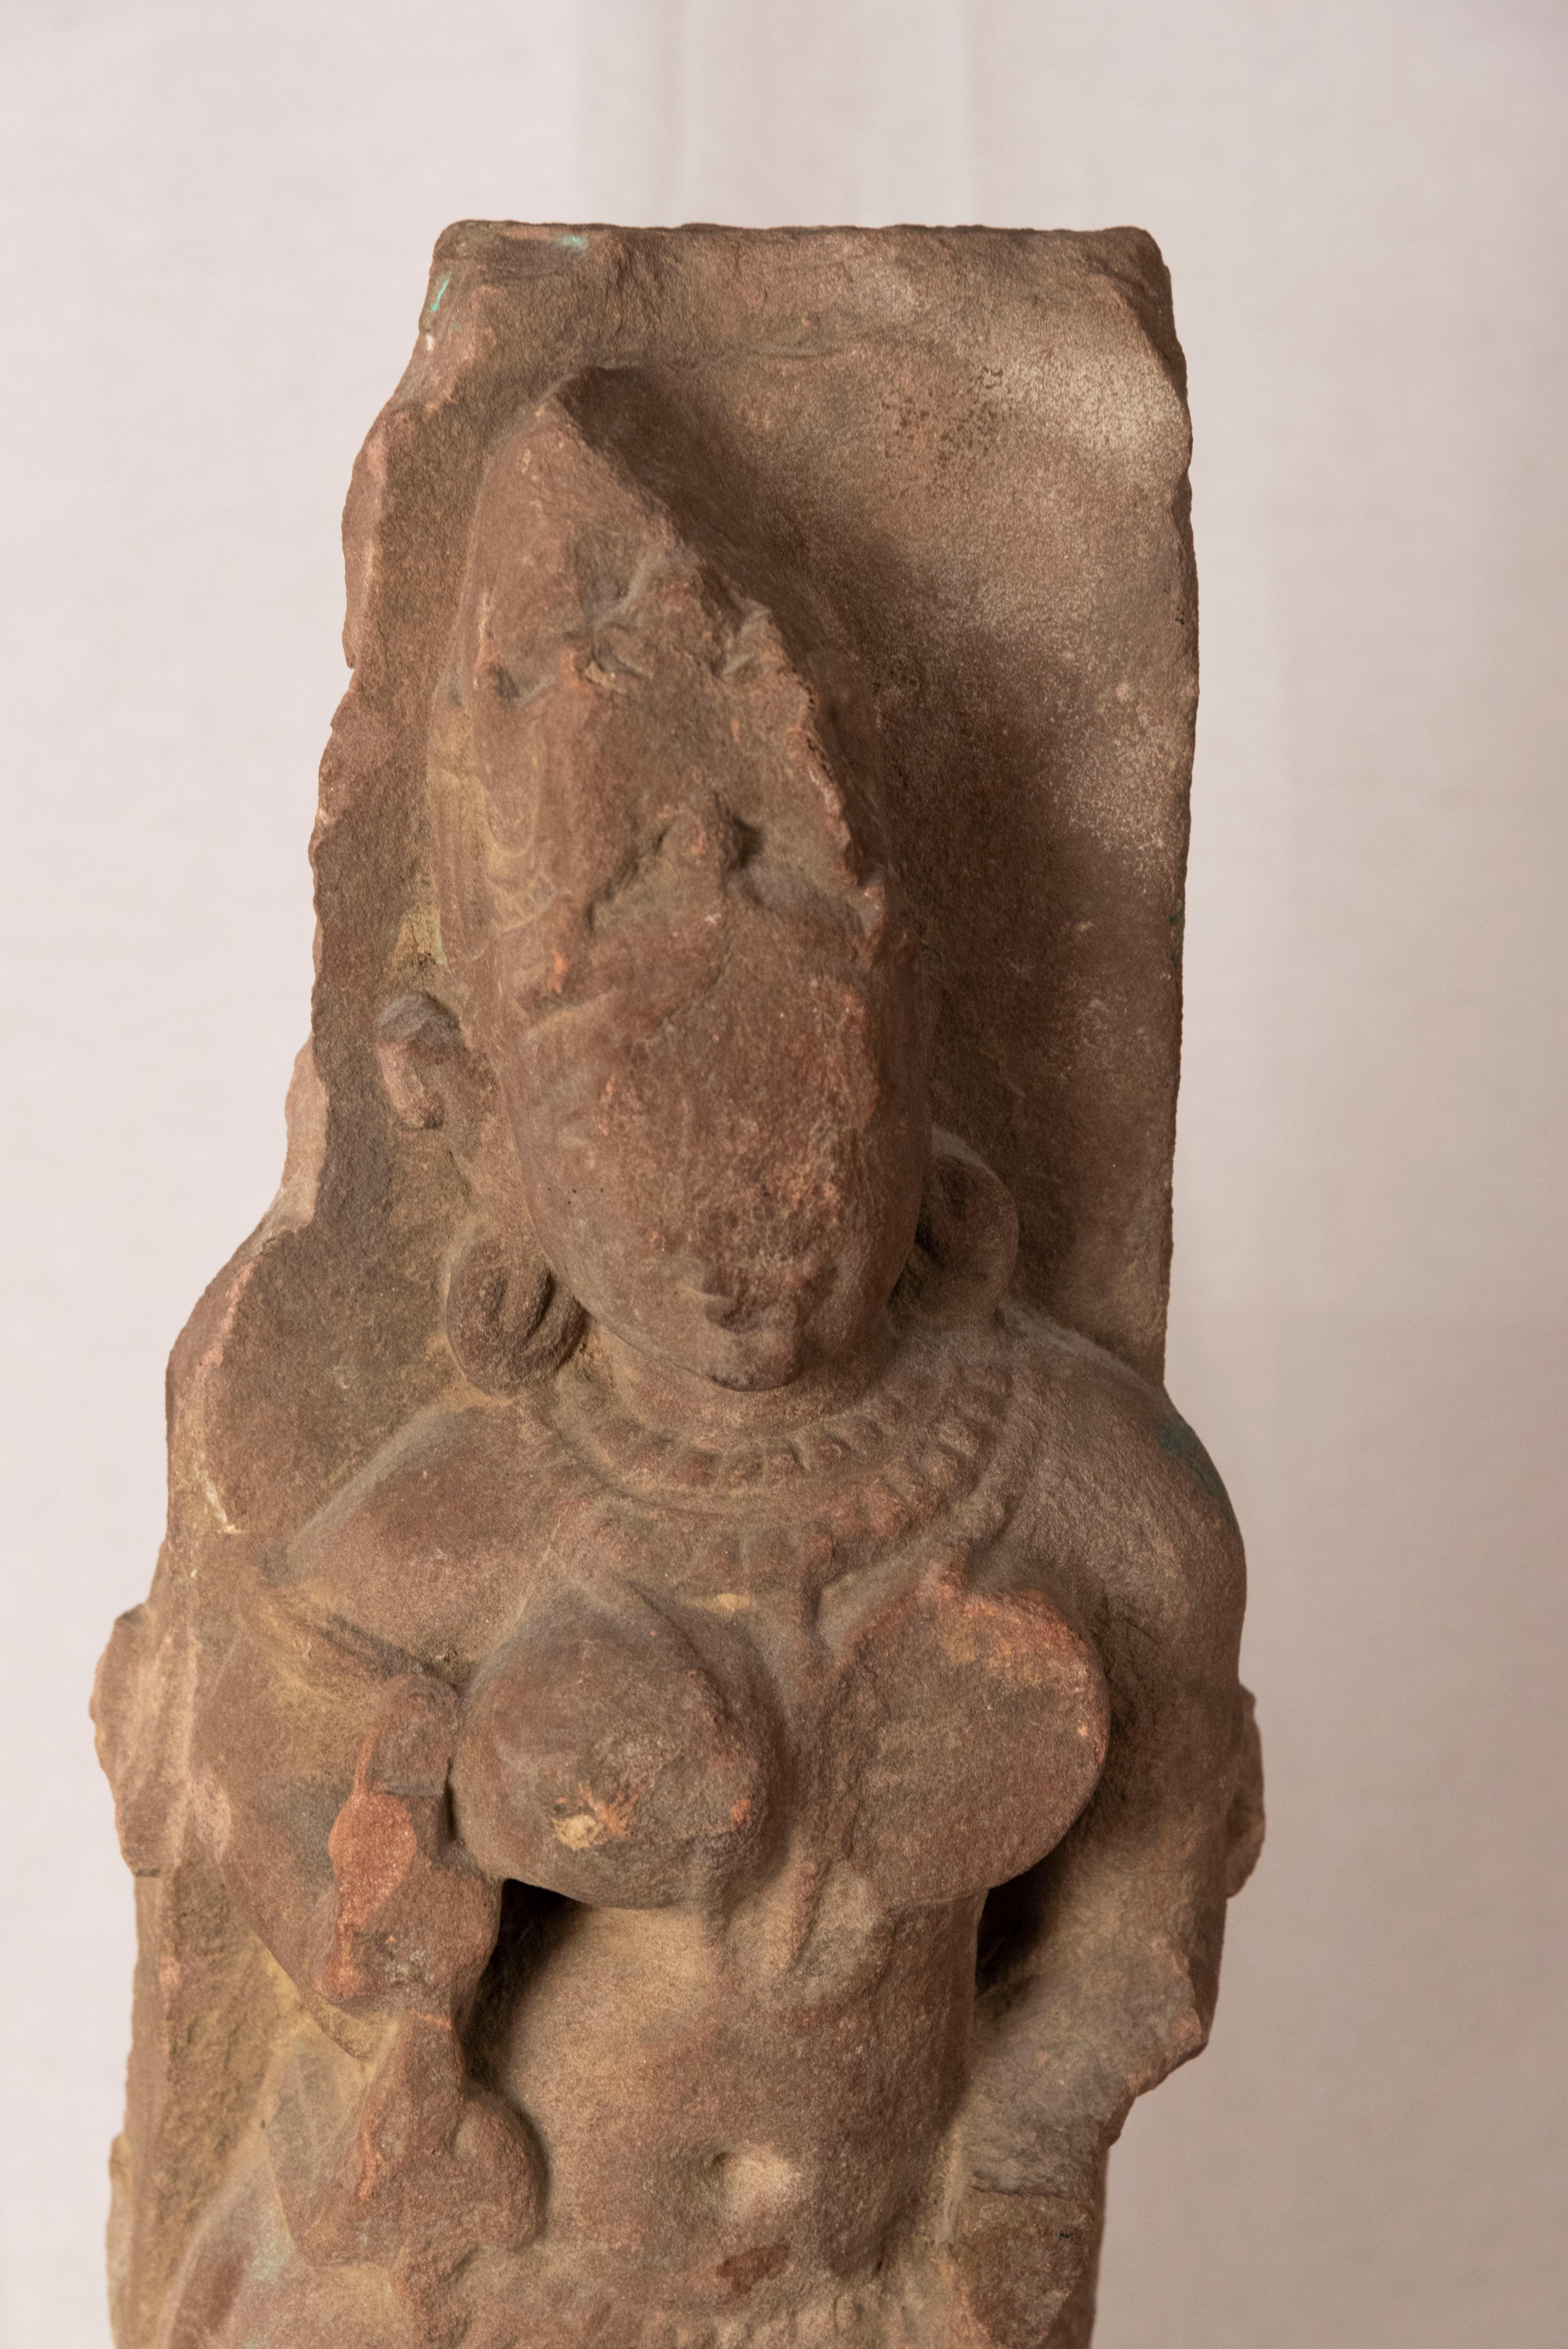 Hindu deity figure carved in basalt, (circa 1850), India

Measures: 18.5 x 6.5 x 4 no base
21 x 6 x 6 with base.